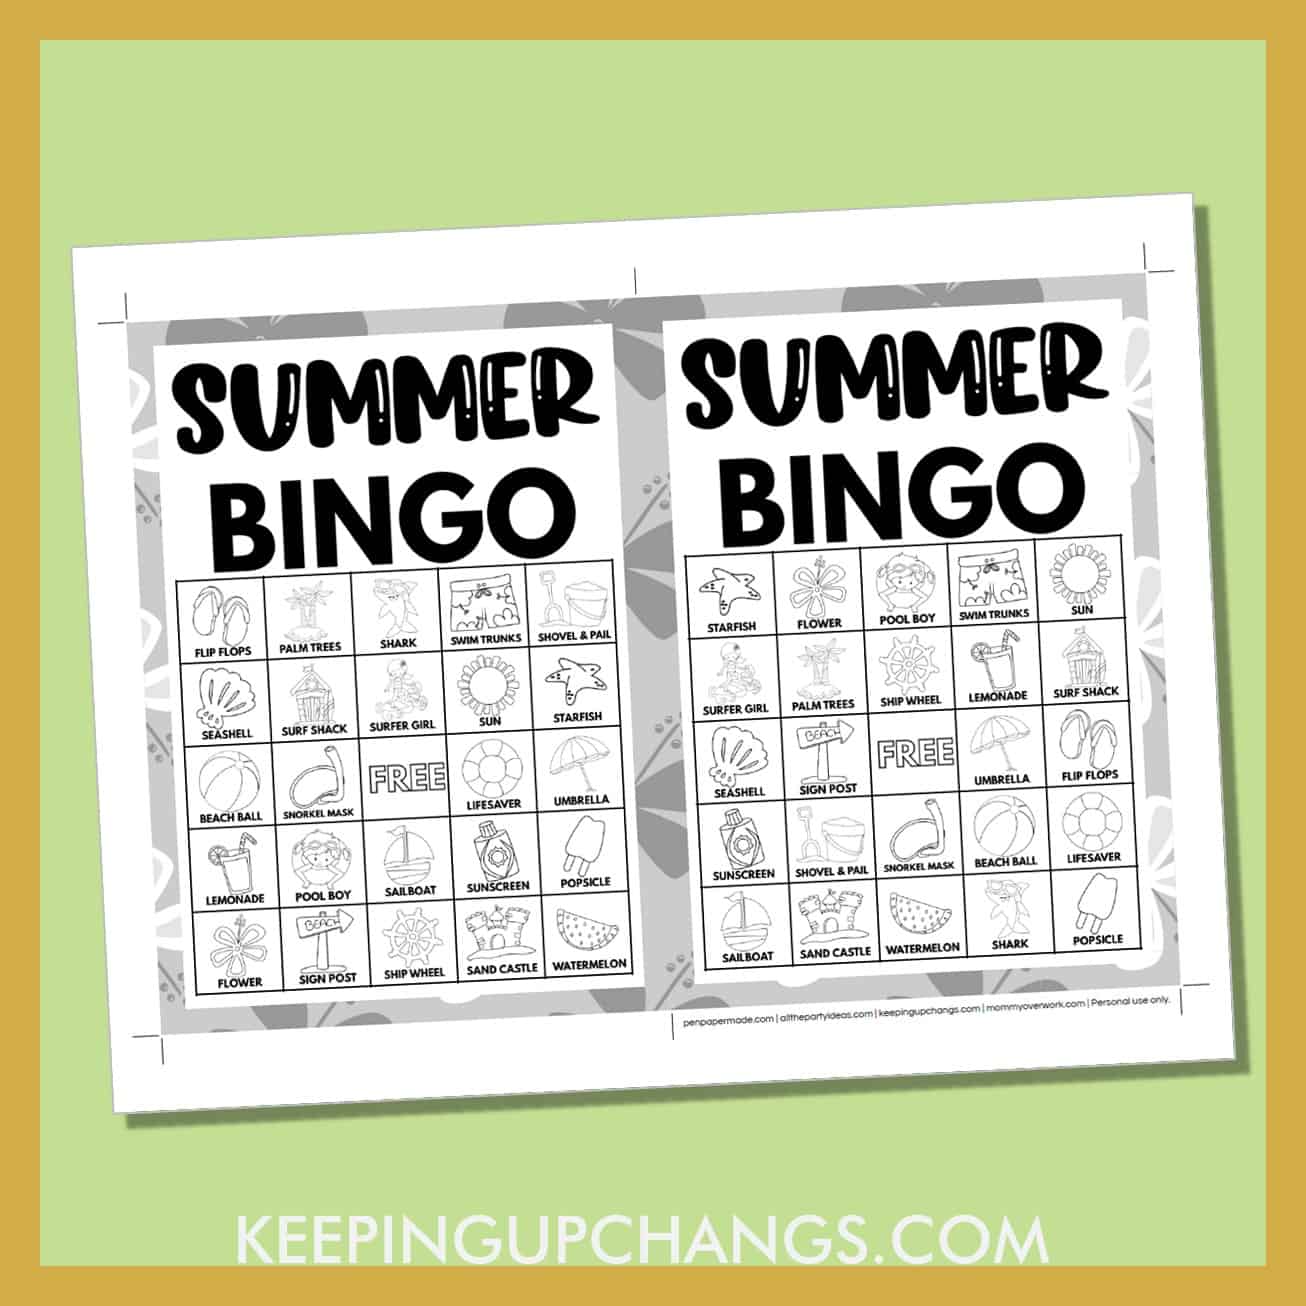 free summer beach bingo card 5x5 5x7 game boards with black white images and text words.